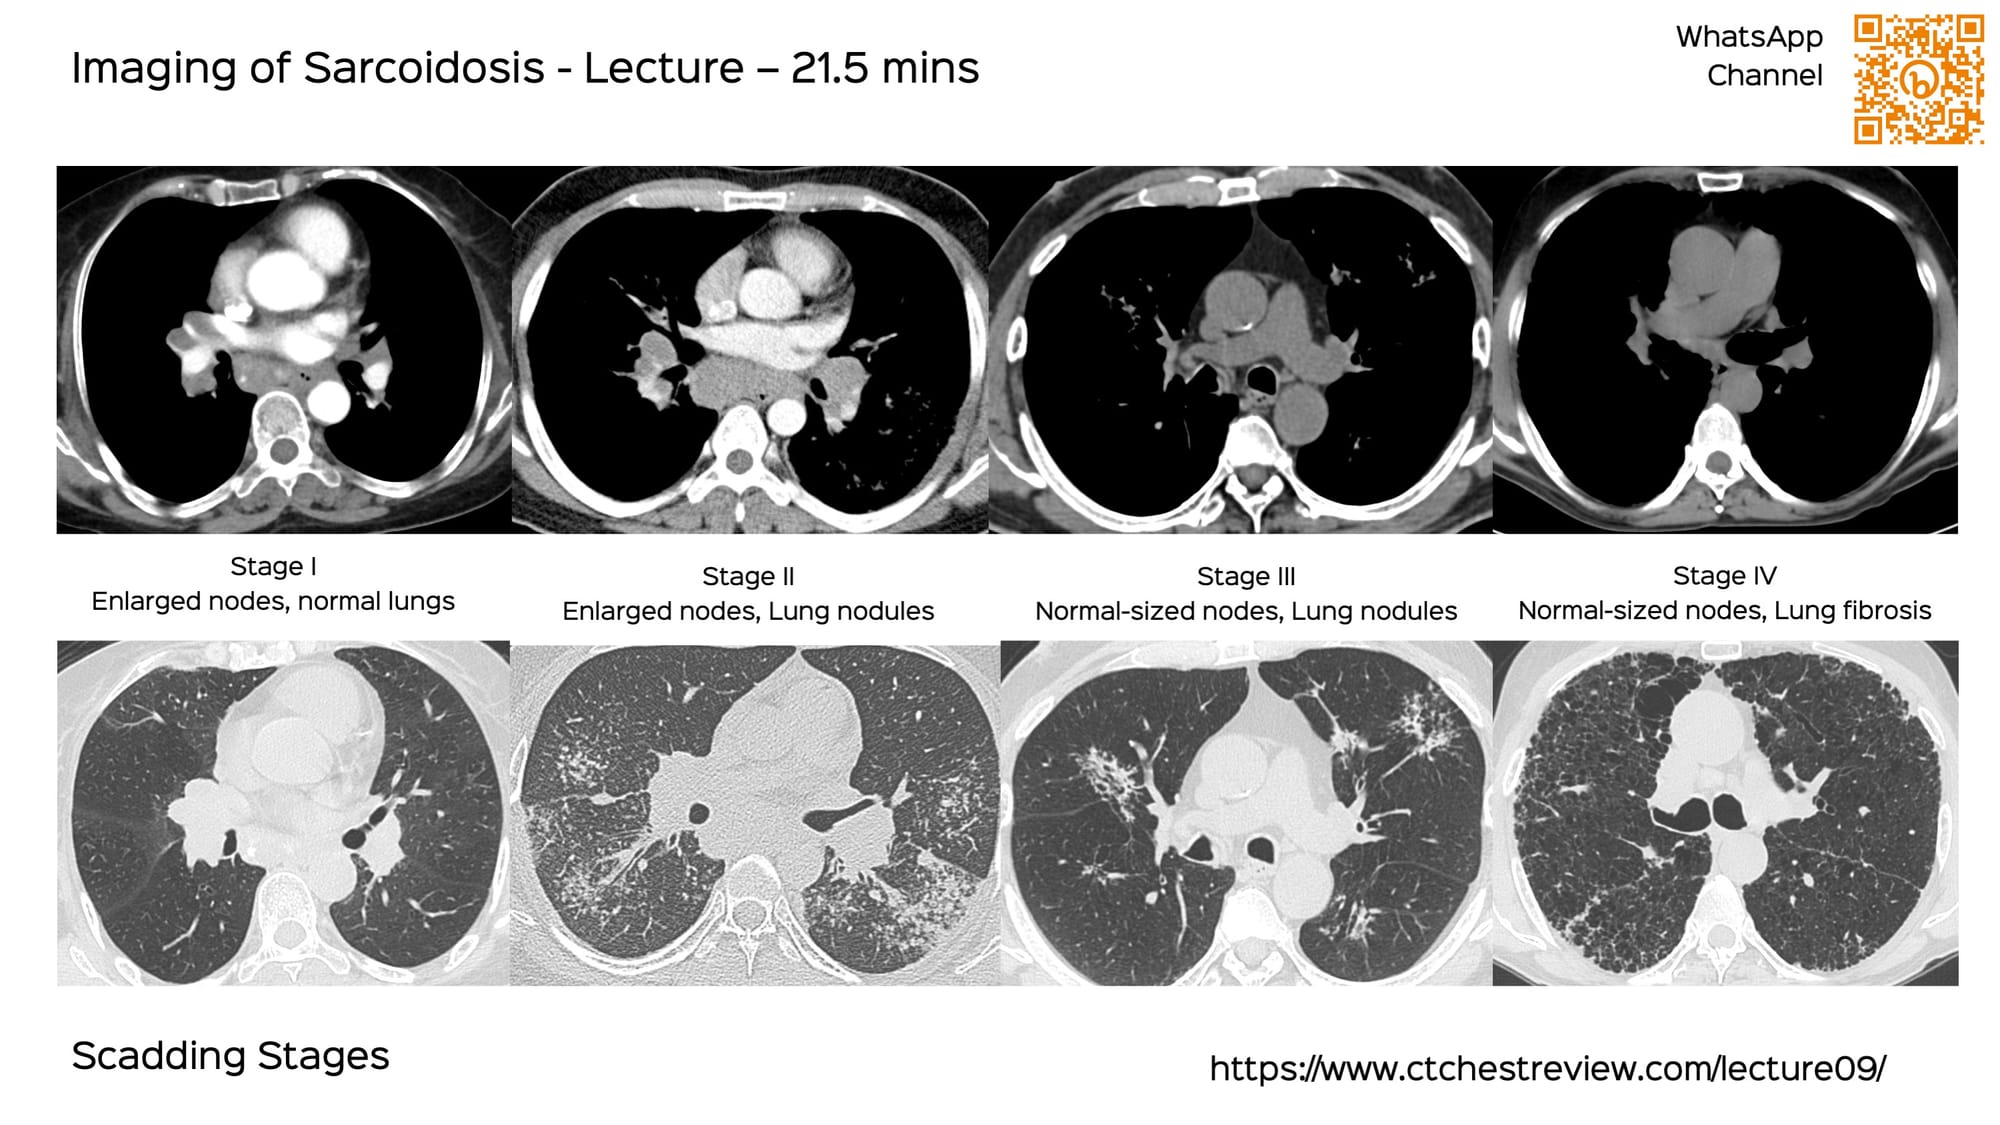 Lecture: Imaging of Sarcoidosis